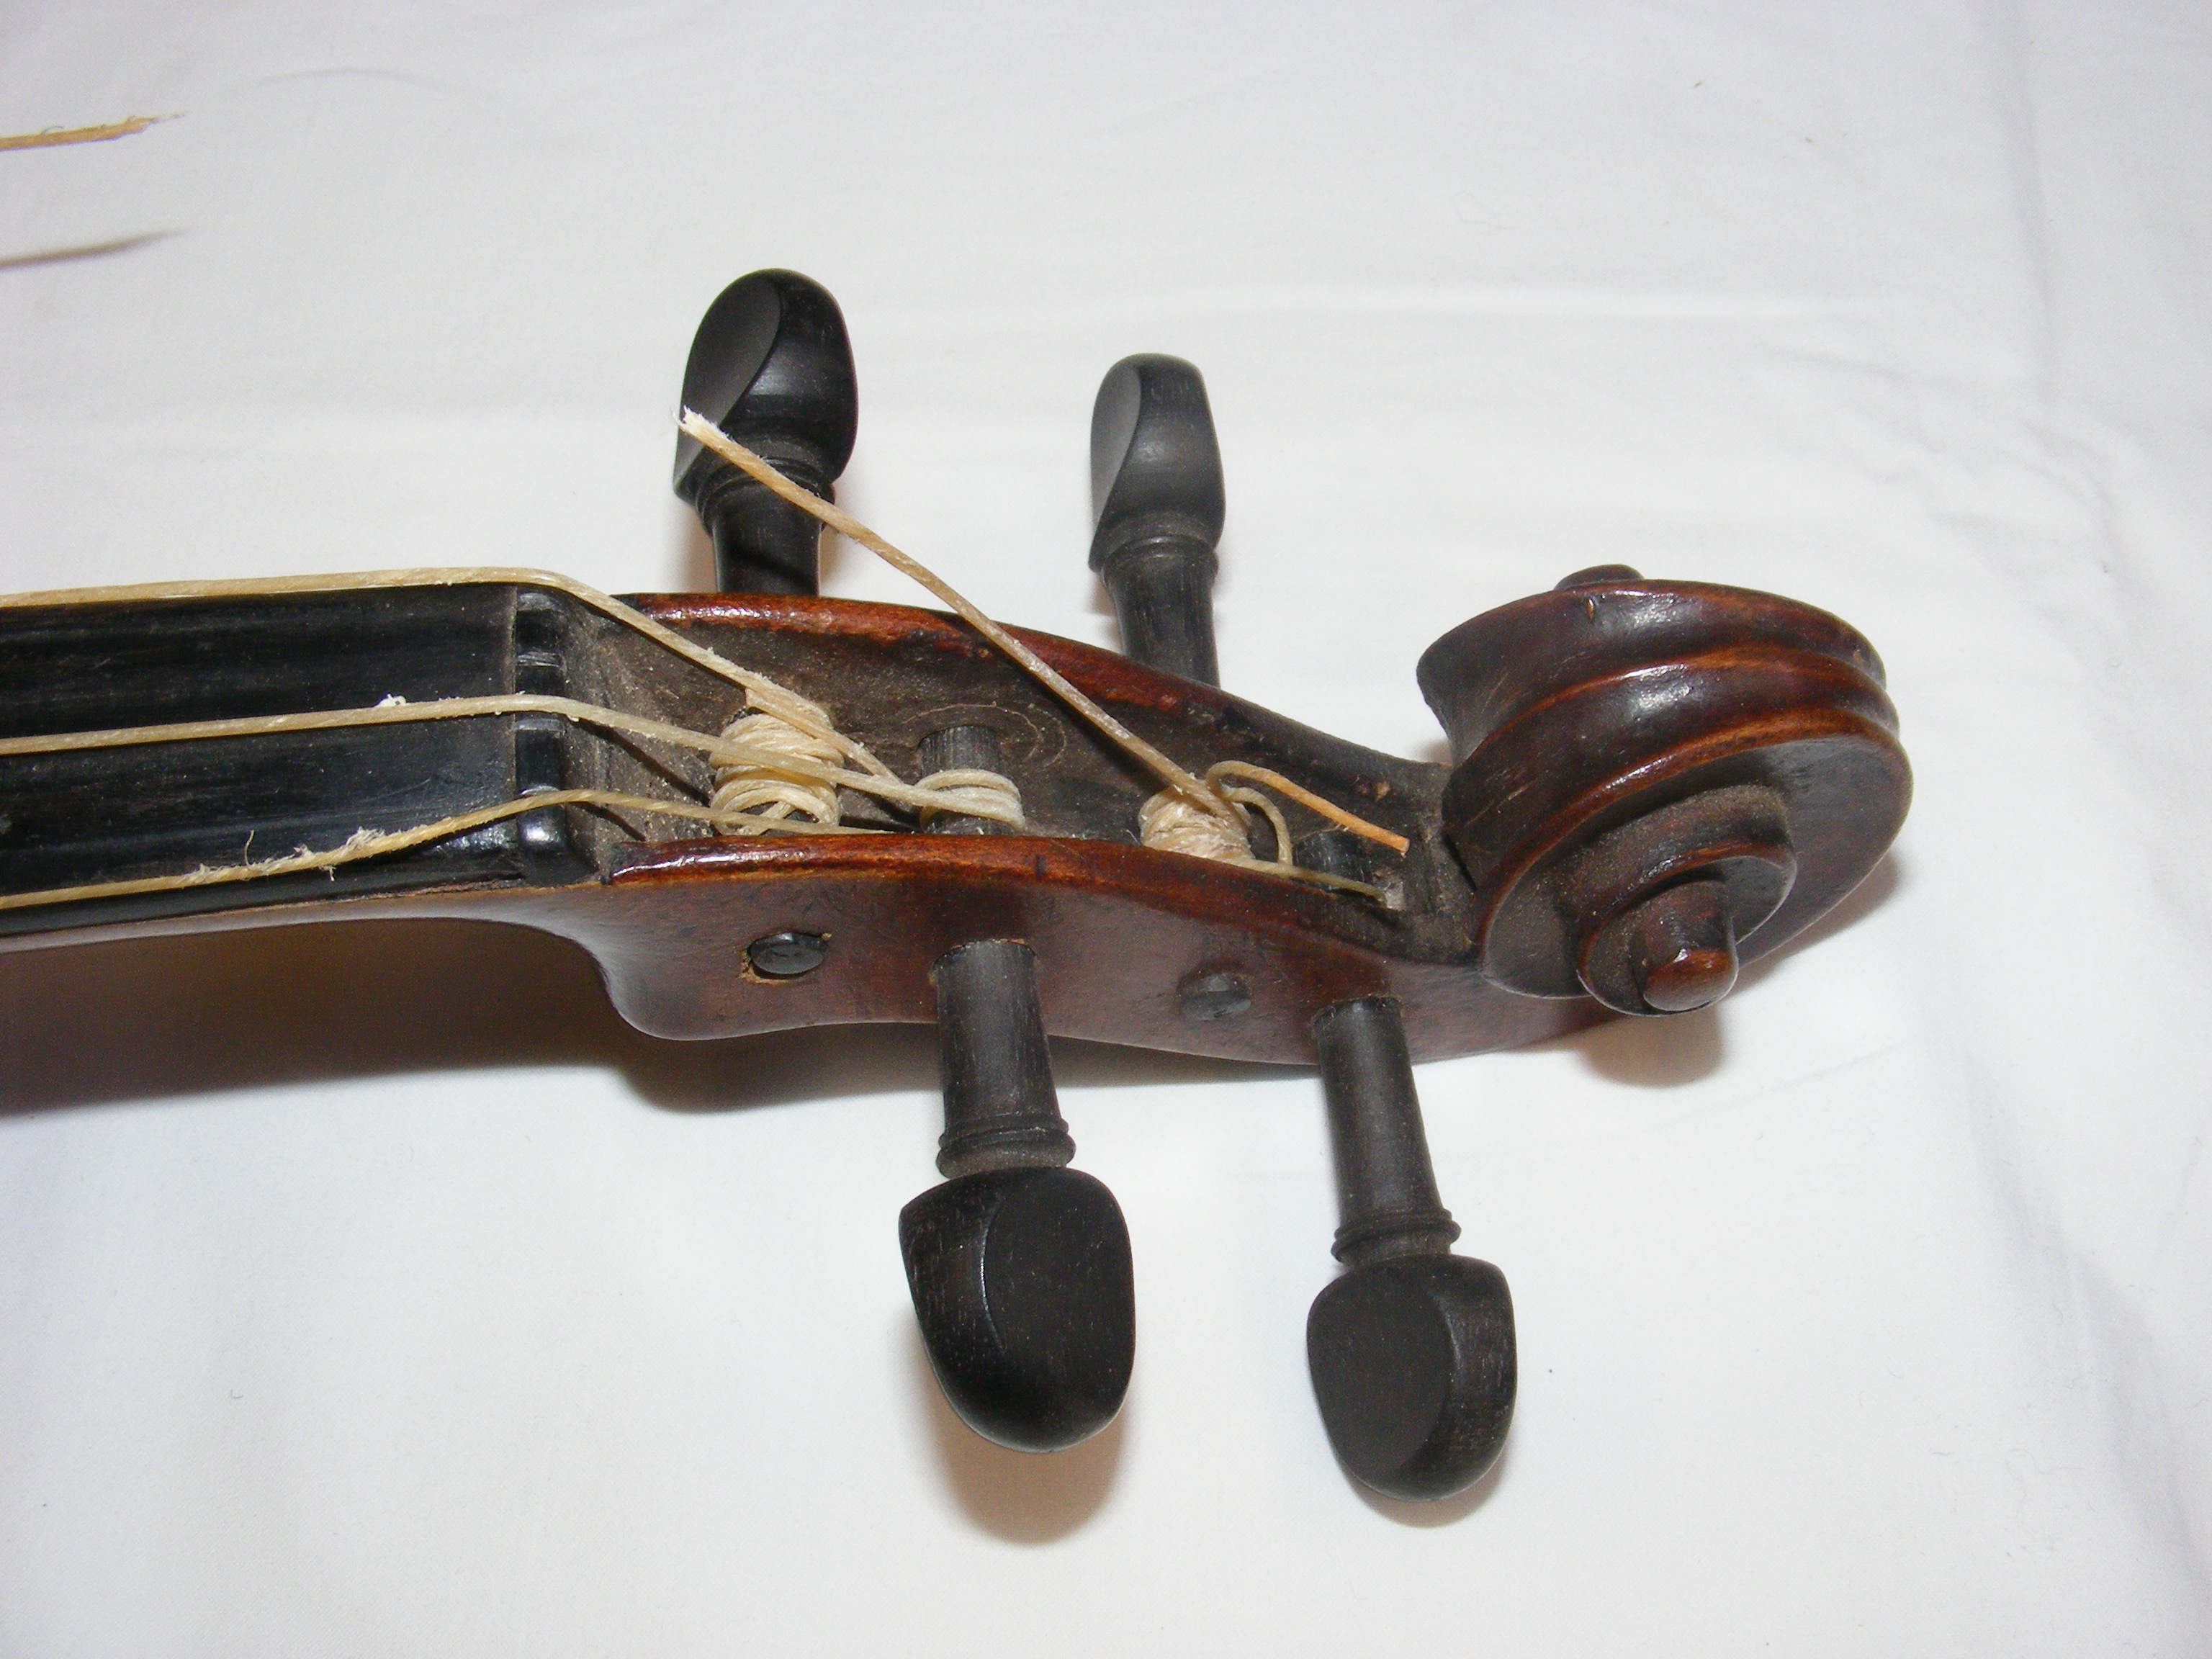 An antique violin with Andreas Guarnerius label, t - Image 26 of 27